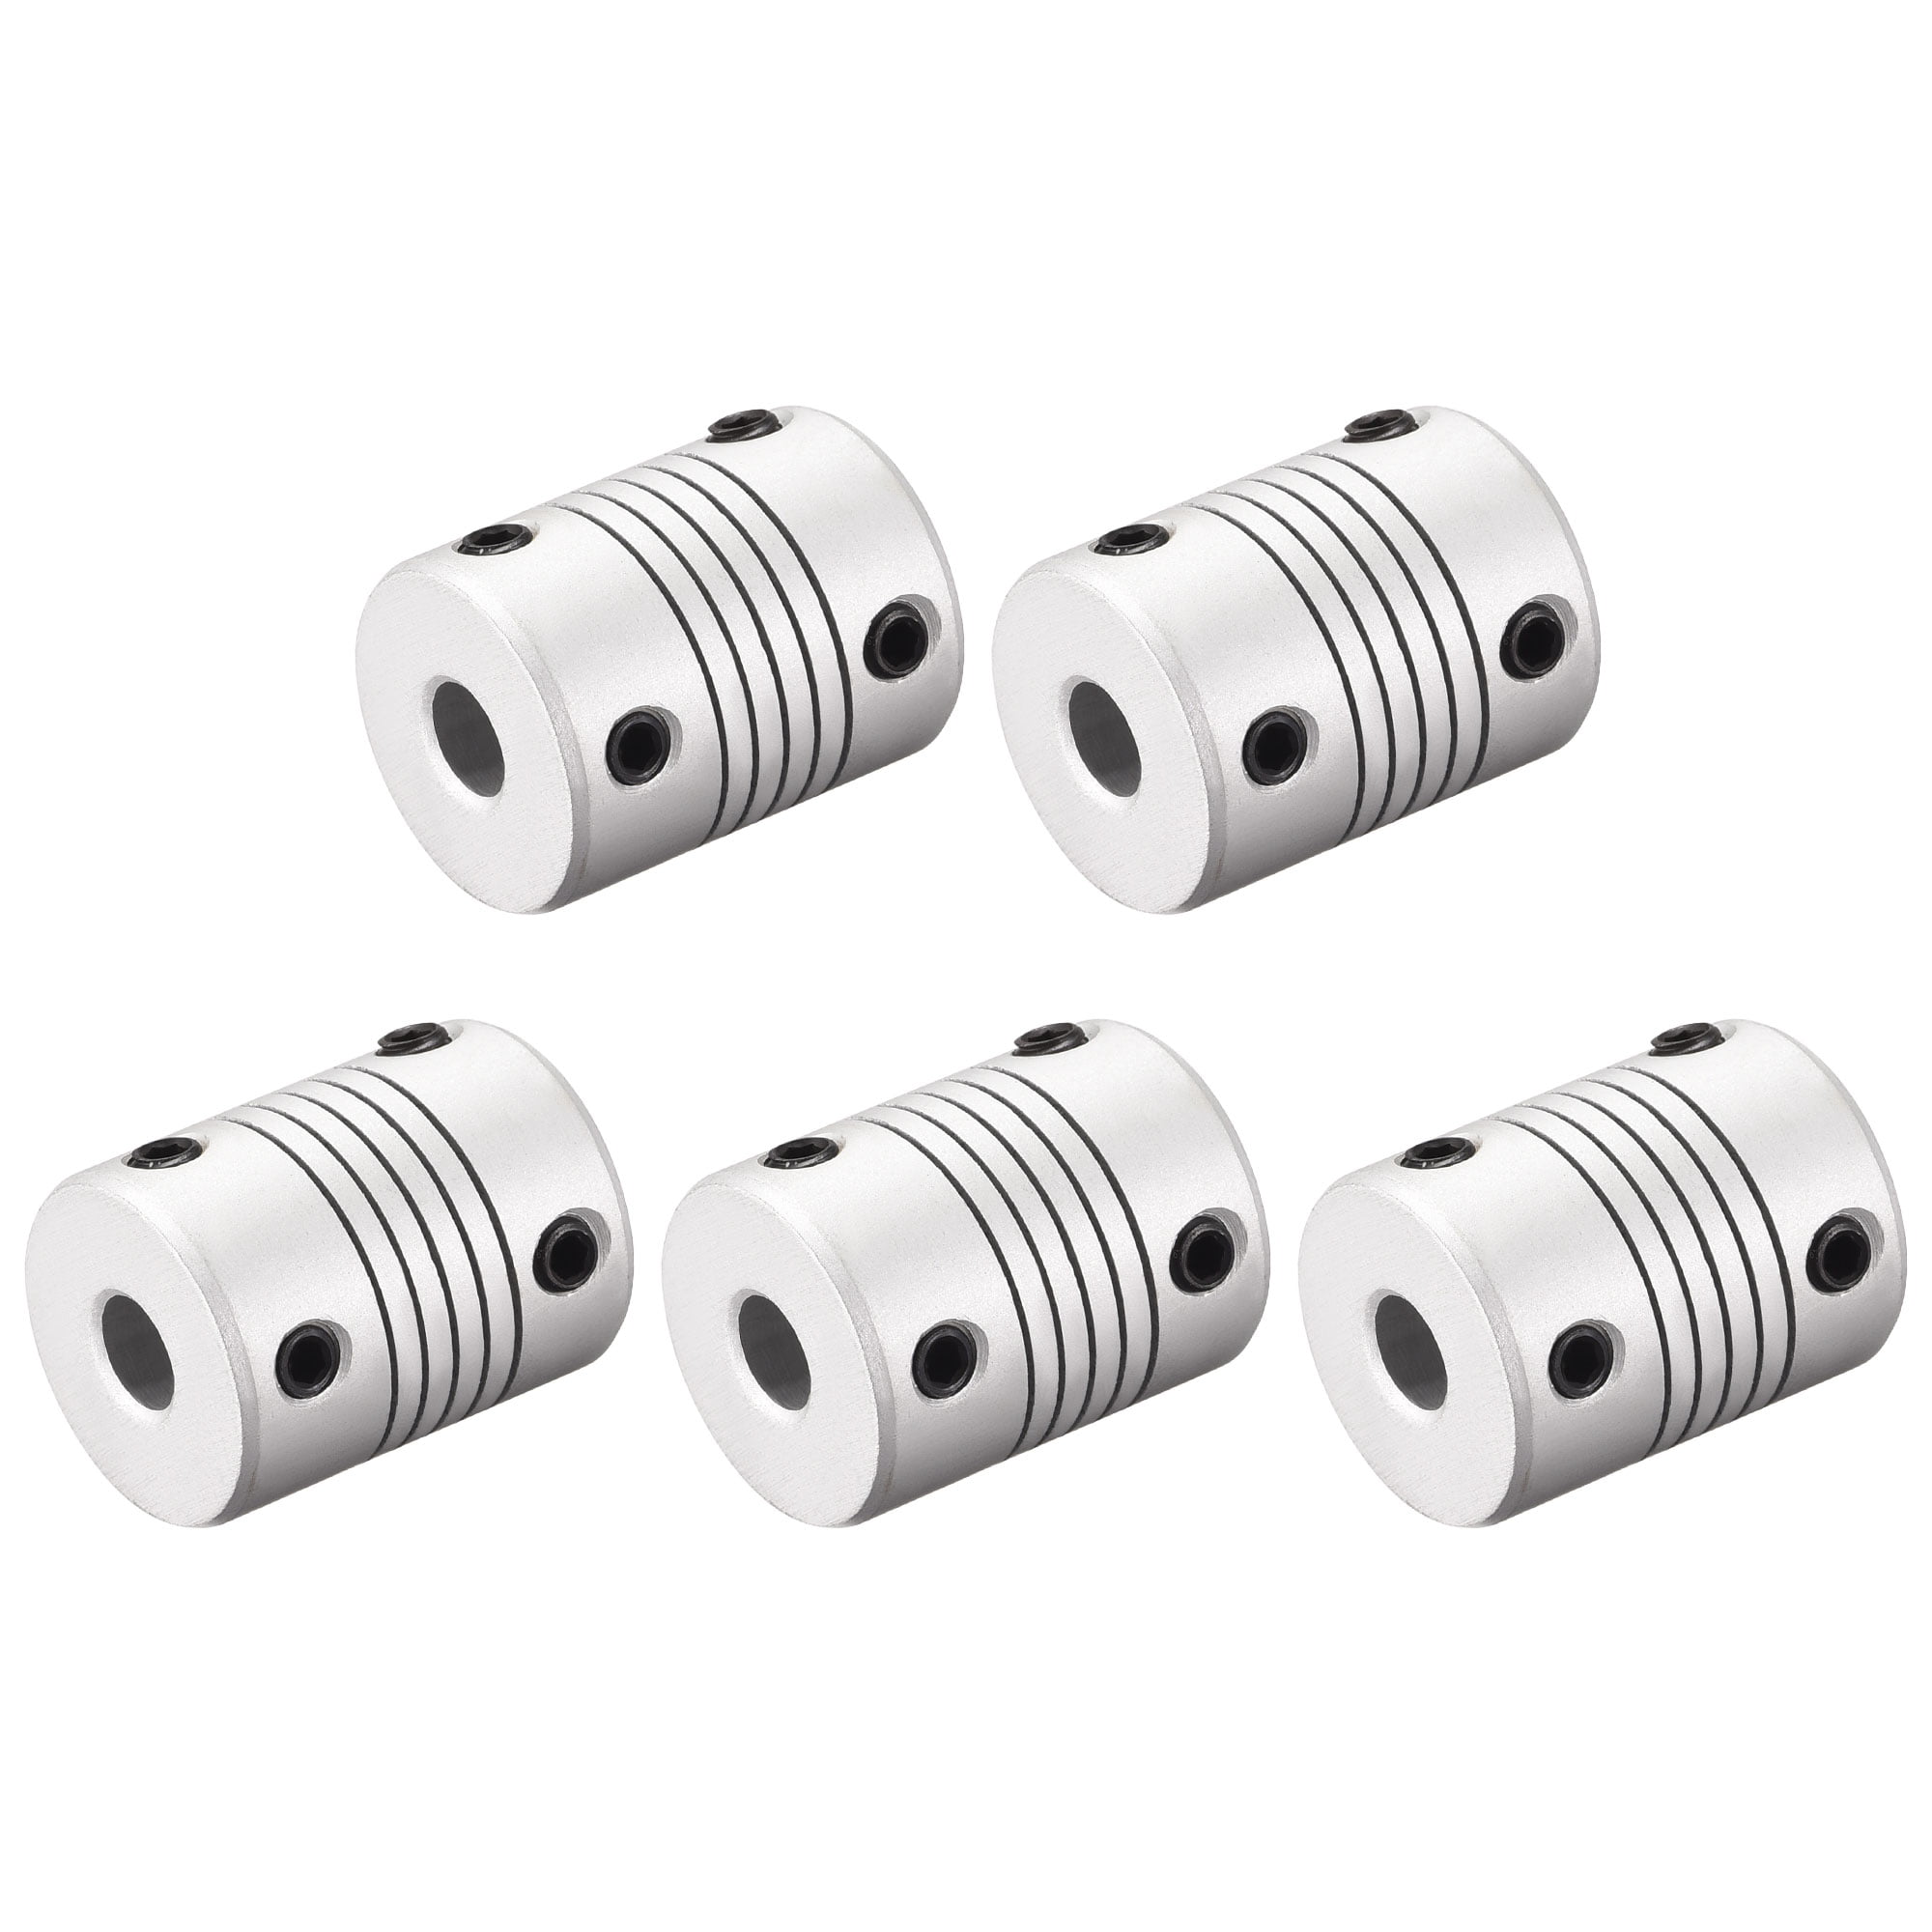 uxcell 8mm to 8mm Aluminum Alloy Shaft Coupling Flexible Coupler Motor Connector Joint L25xD19 Silver 